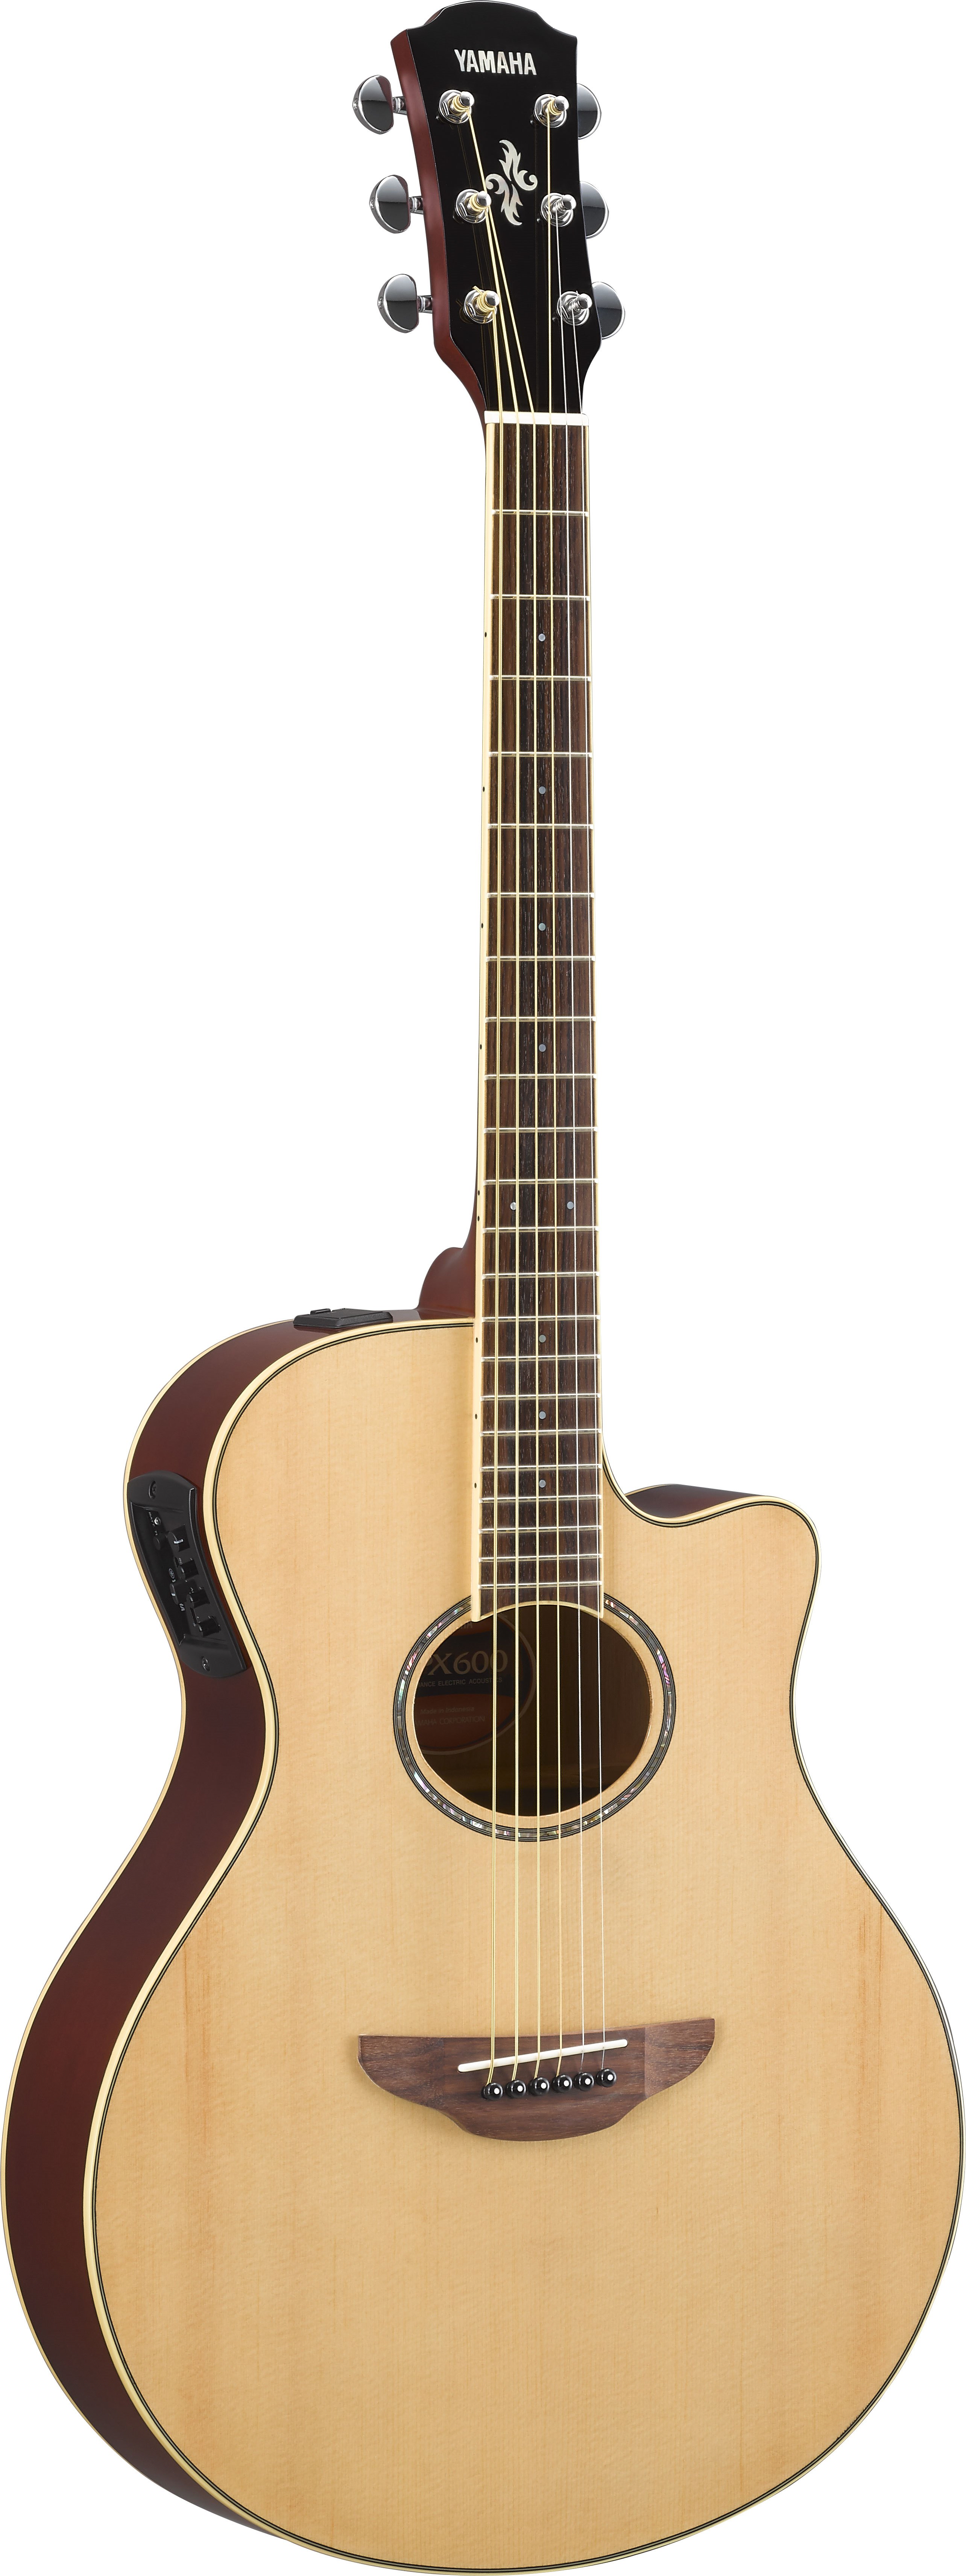 Yamaha Apx600 - Natural - Guitare Electro Acoustique - Variation 1